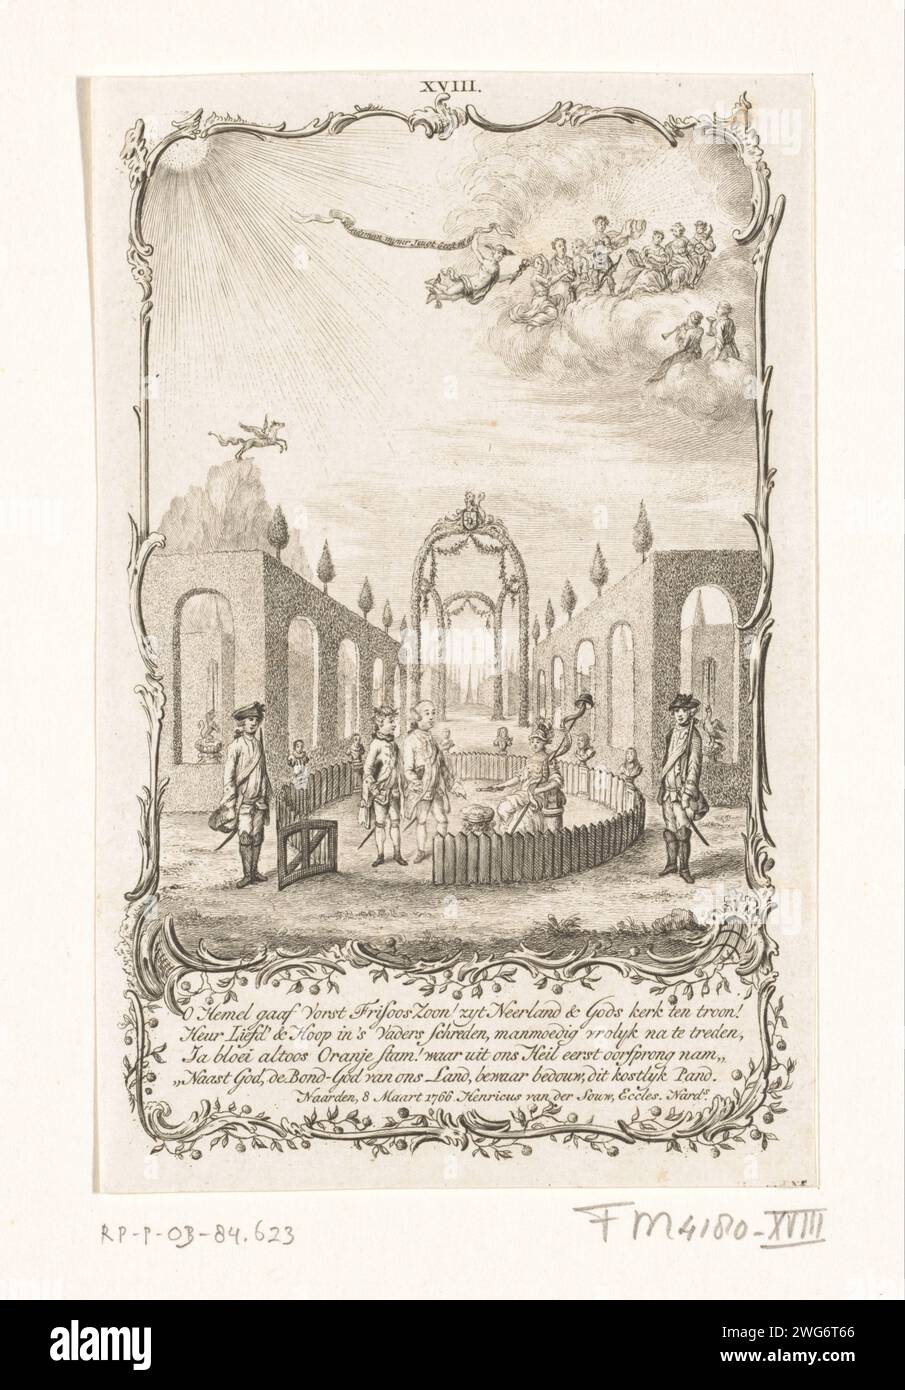 Decoration on the house of Mr. H. van der Souw in Naarden, 1766, 1774 - 1776 print Decoration applied to the house of the pastor Henricus van der Souw in Naarden. Panel with the prince at the Dutch Virgin in the Dutch garden. With four -line verse. On the occasion of the majority of Prince Willem V on March 8, 1766. Numbered at the top: XVIII. Northern Netherlands paper etching / engraving public festivities (+ festive decoration  festive activities). fenced or walled garden; 'Hortus Conclusus' Naarden Stock Photo